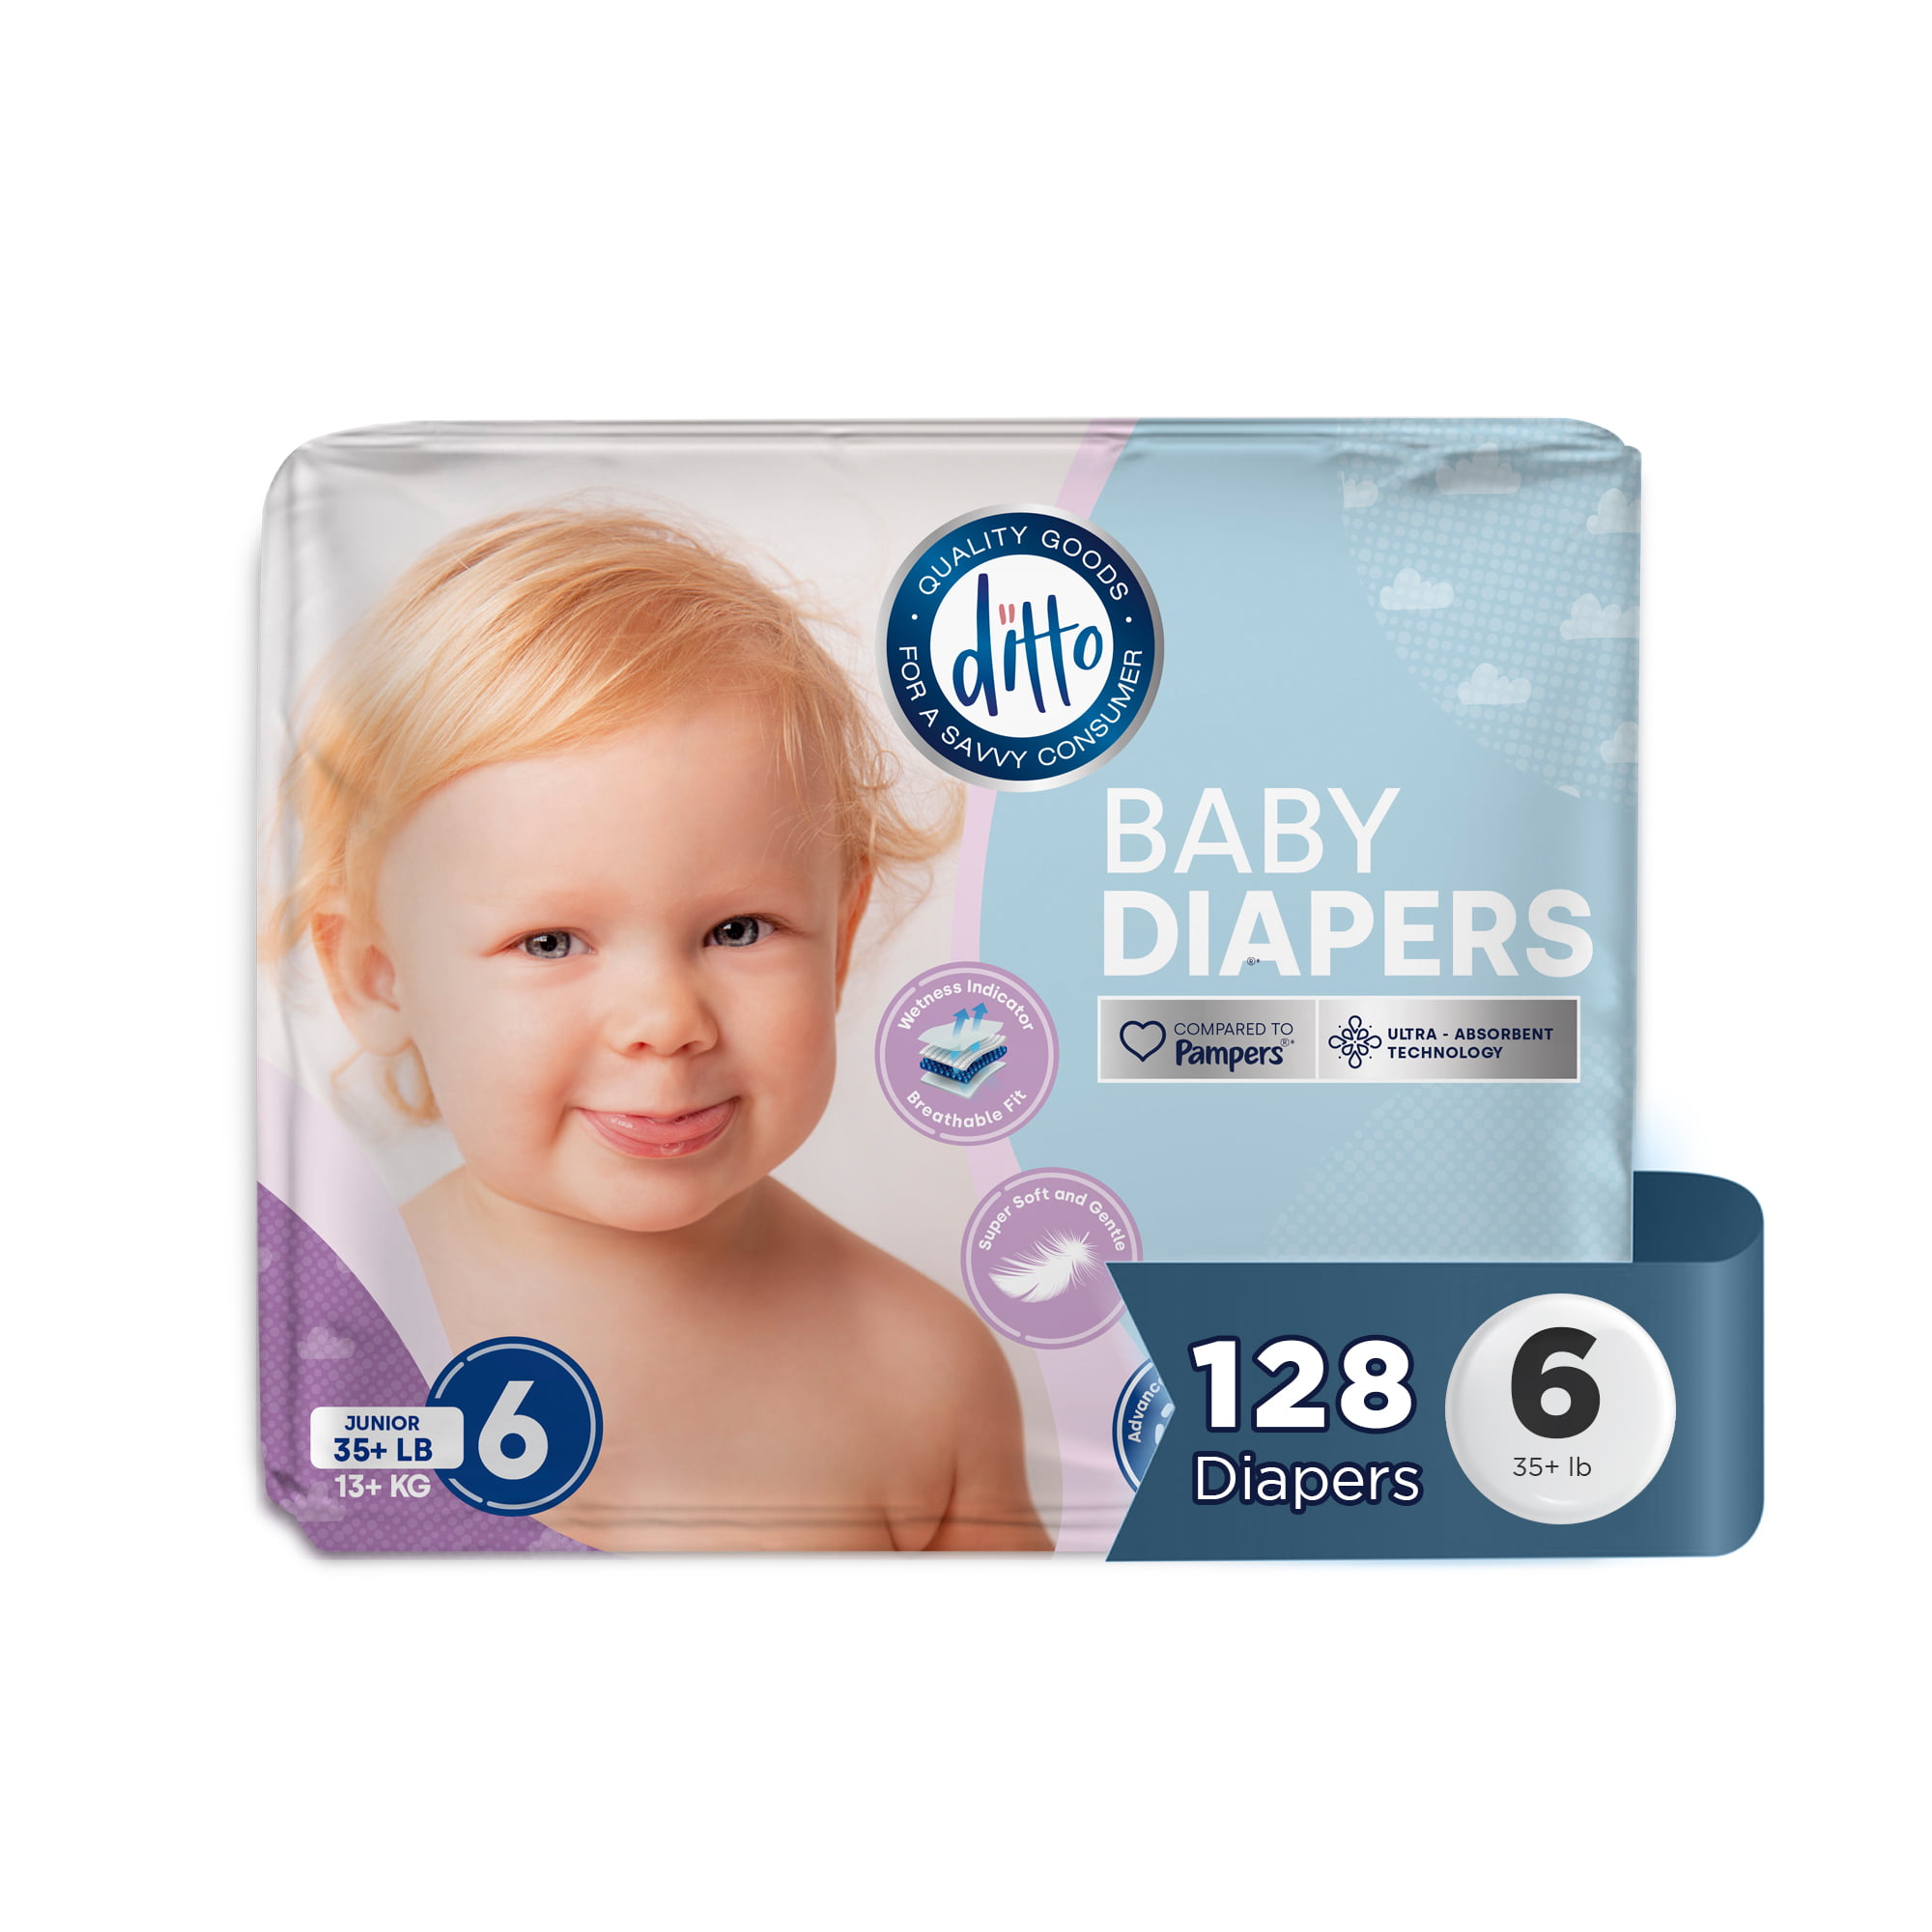 Ditto Baby Diapers Size 6, 128 Count Disposable Diapers - Super Pack - Perfect for time Night time - No Chemical Smell, Super and Flexible - Walmart.com